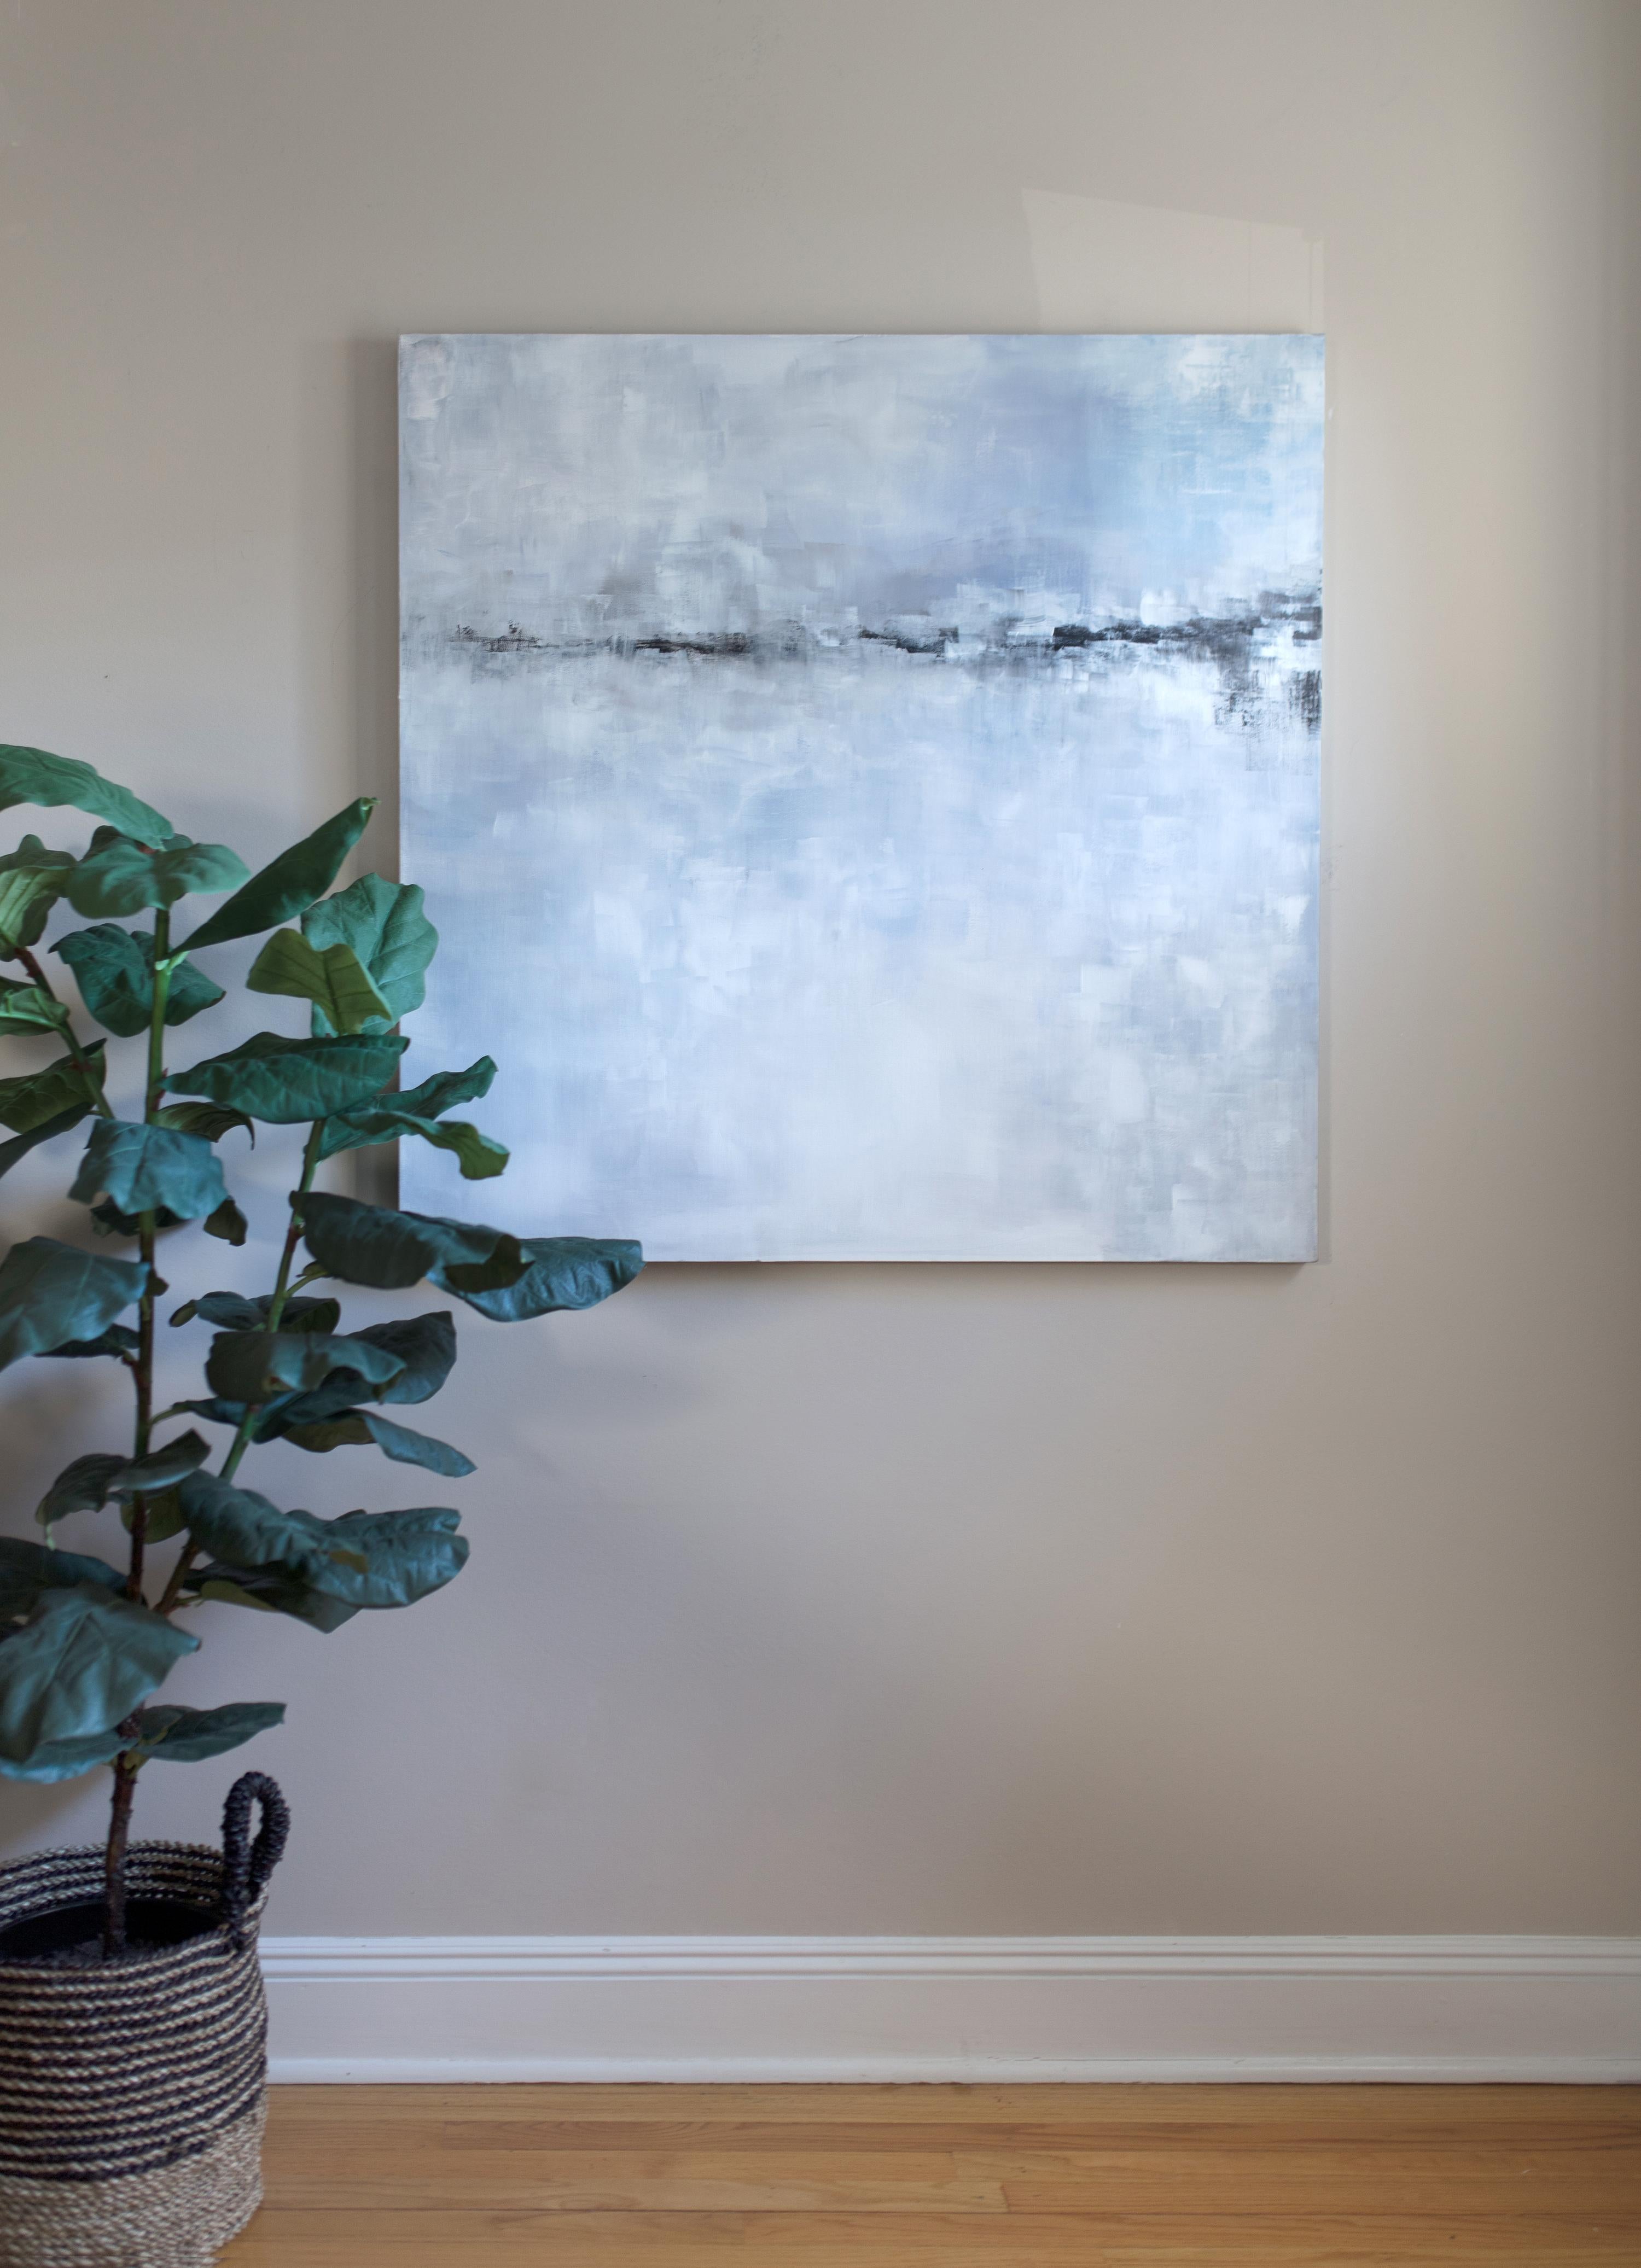 Gallery-wrapped canvas sides painted silver. Signed by artist and ready to hang; No framing necessary.


ARTIST BIO:
Dolores Tema studied design at Parsons School of Design in New York City, and after completing her degree at Hunter College of the